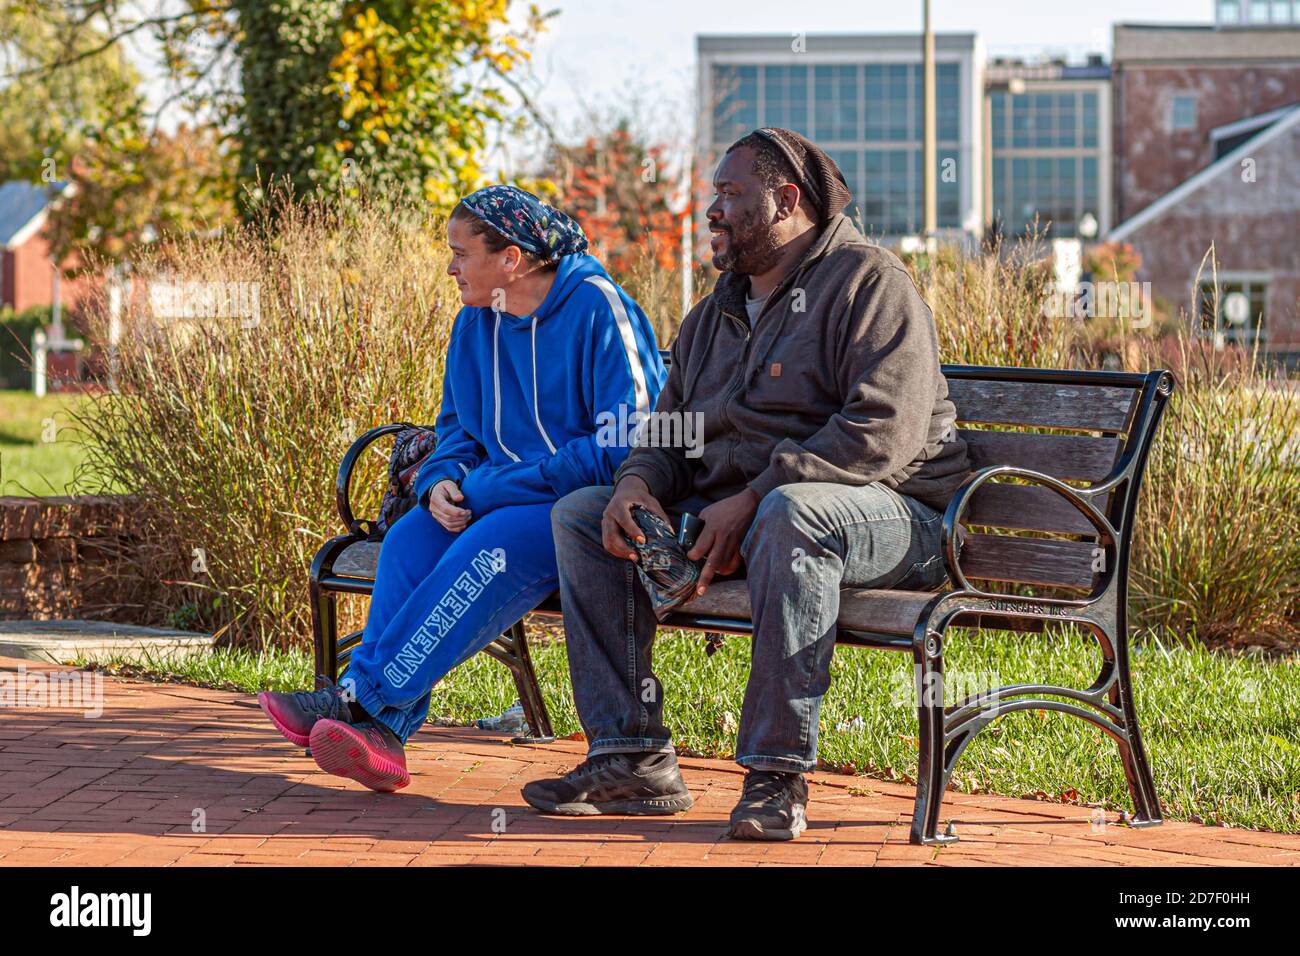 Frederick, MD, USA 10/14/2020: An interracial couple (caucasian woman and African American man) are sitting together on a park bench. The woman wears Stock Photo